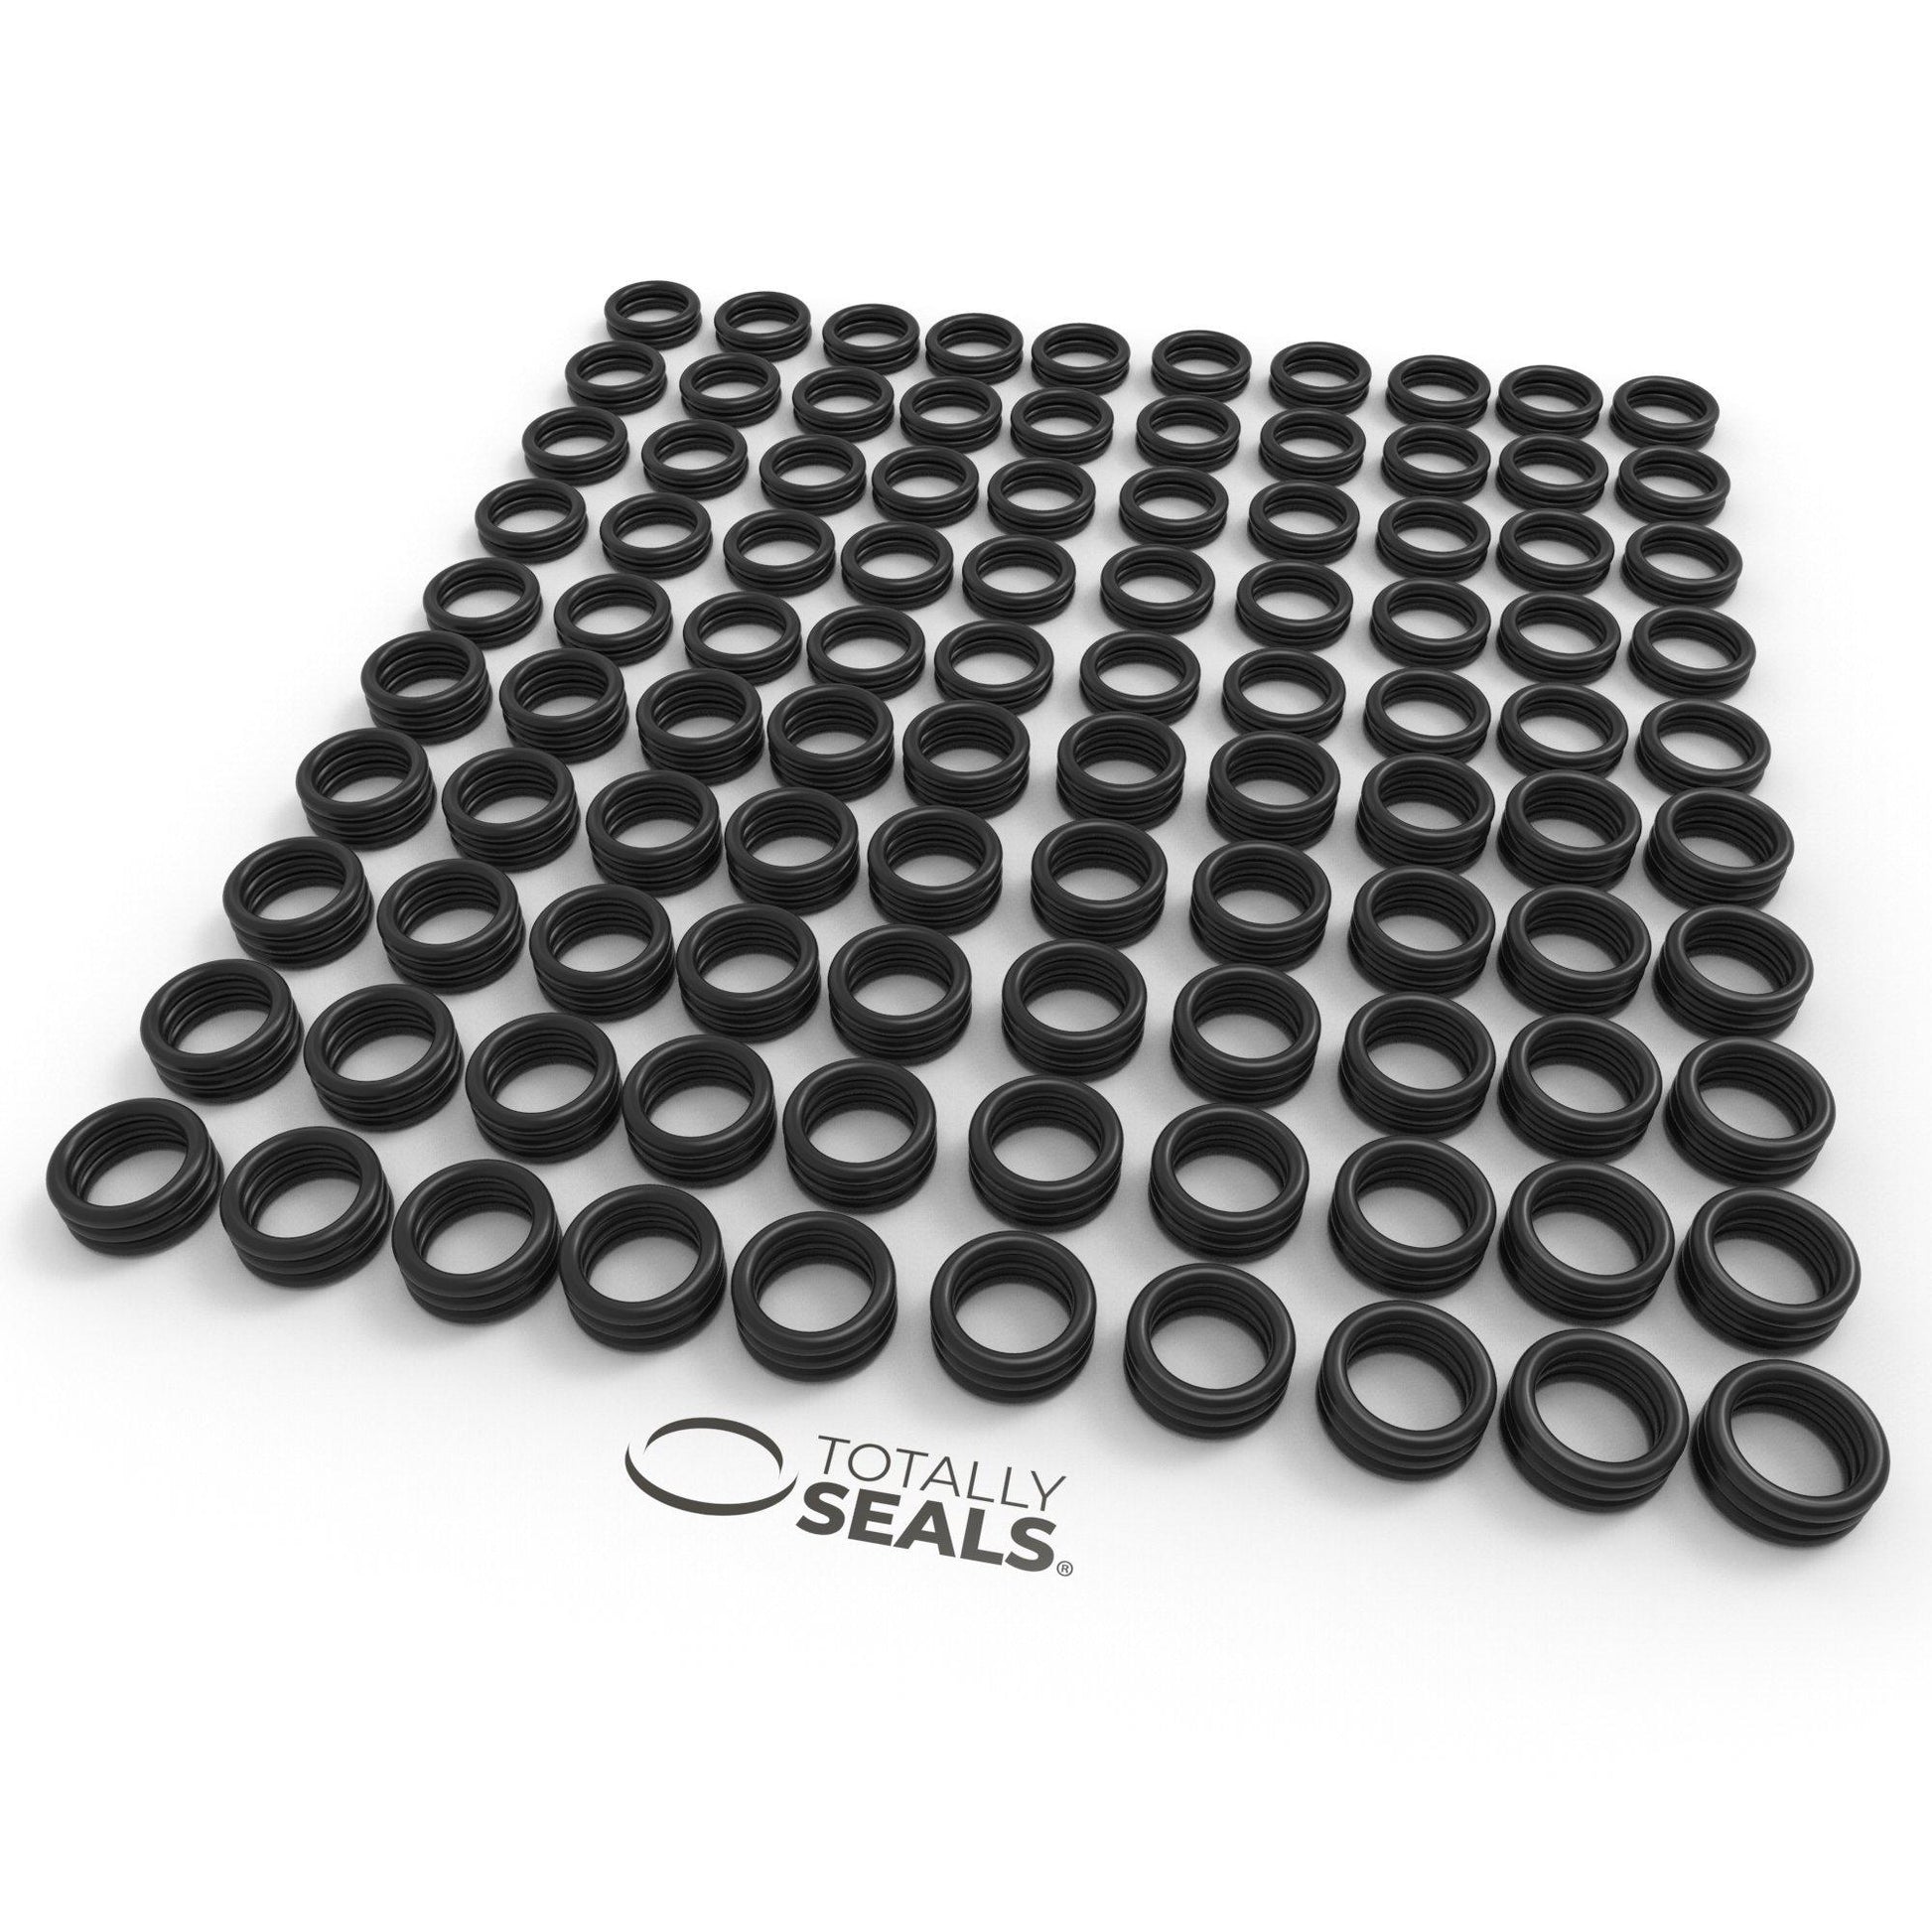 18mm x 1mm (20mm OD) Nitrile O-Rings - Totally Seals®